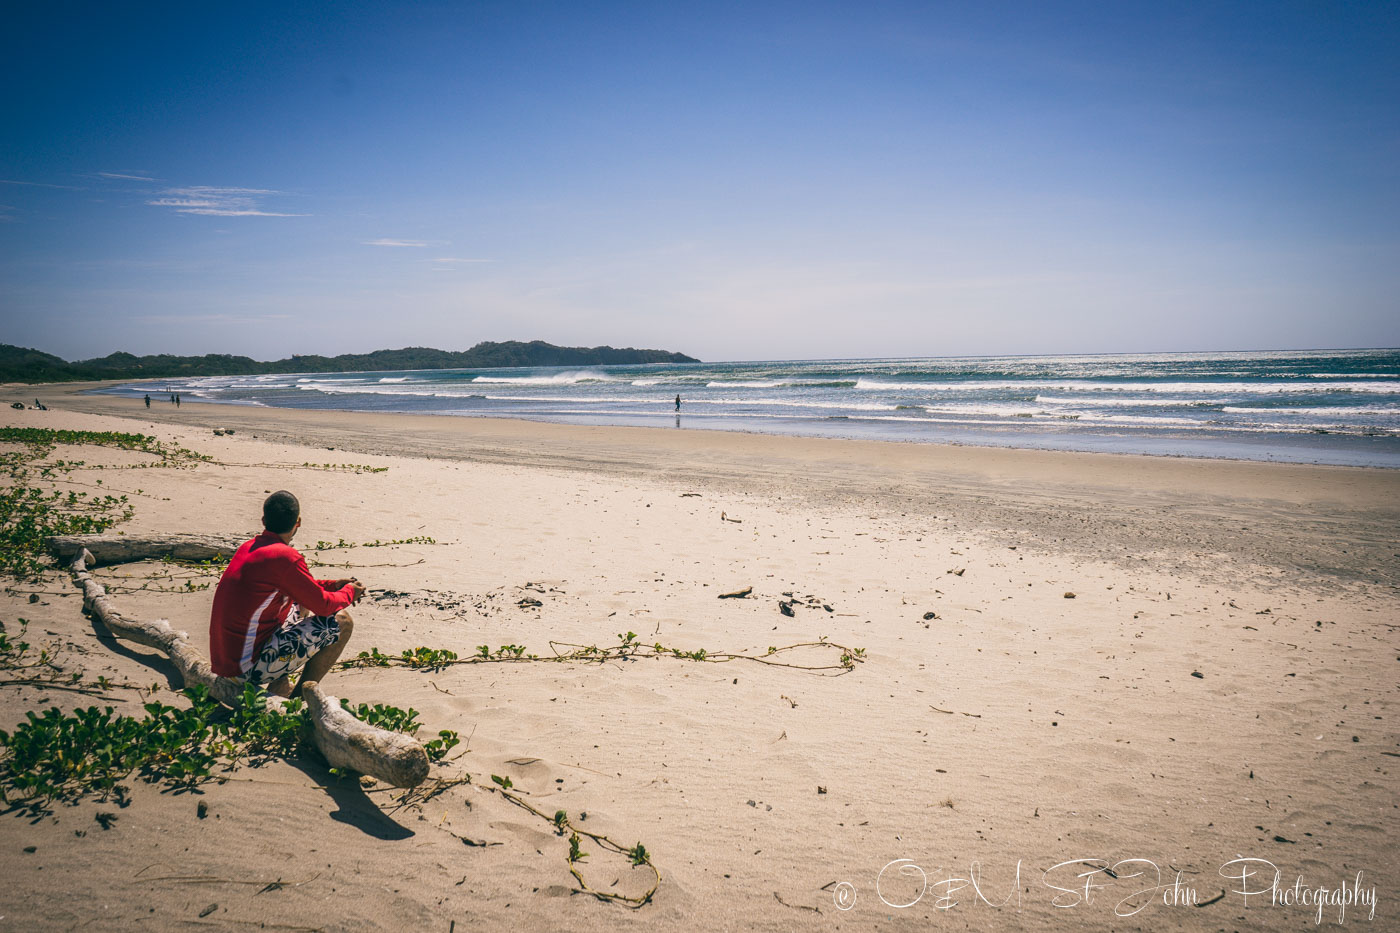 costa rica backpacking: Things To Do in Jaco Costa Rica